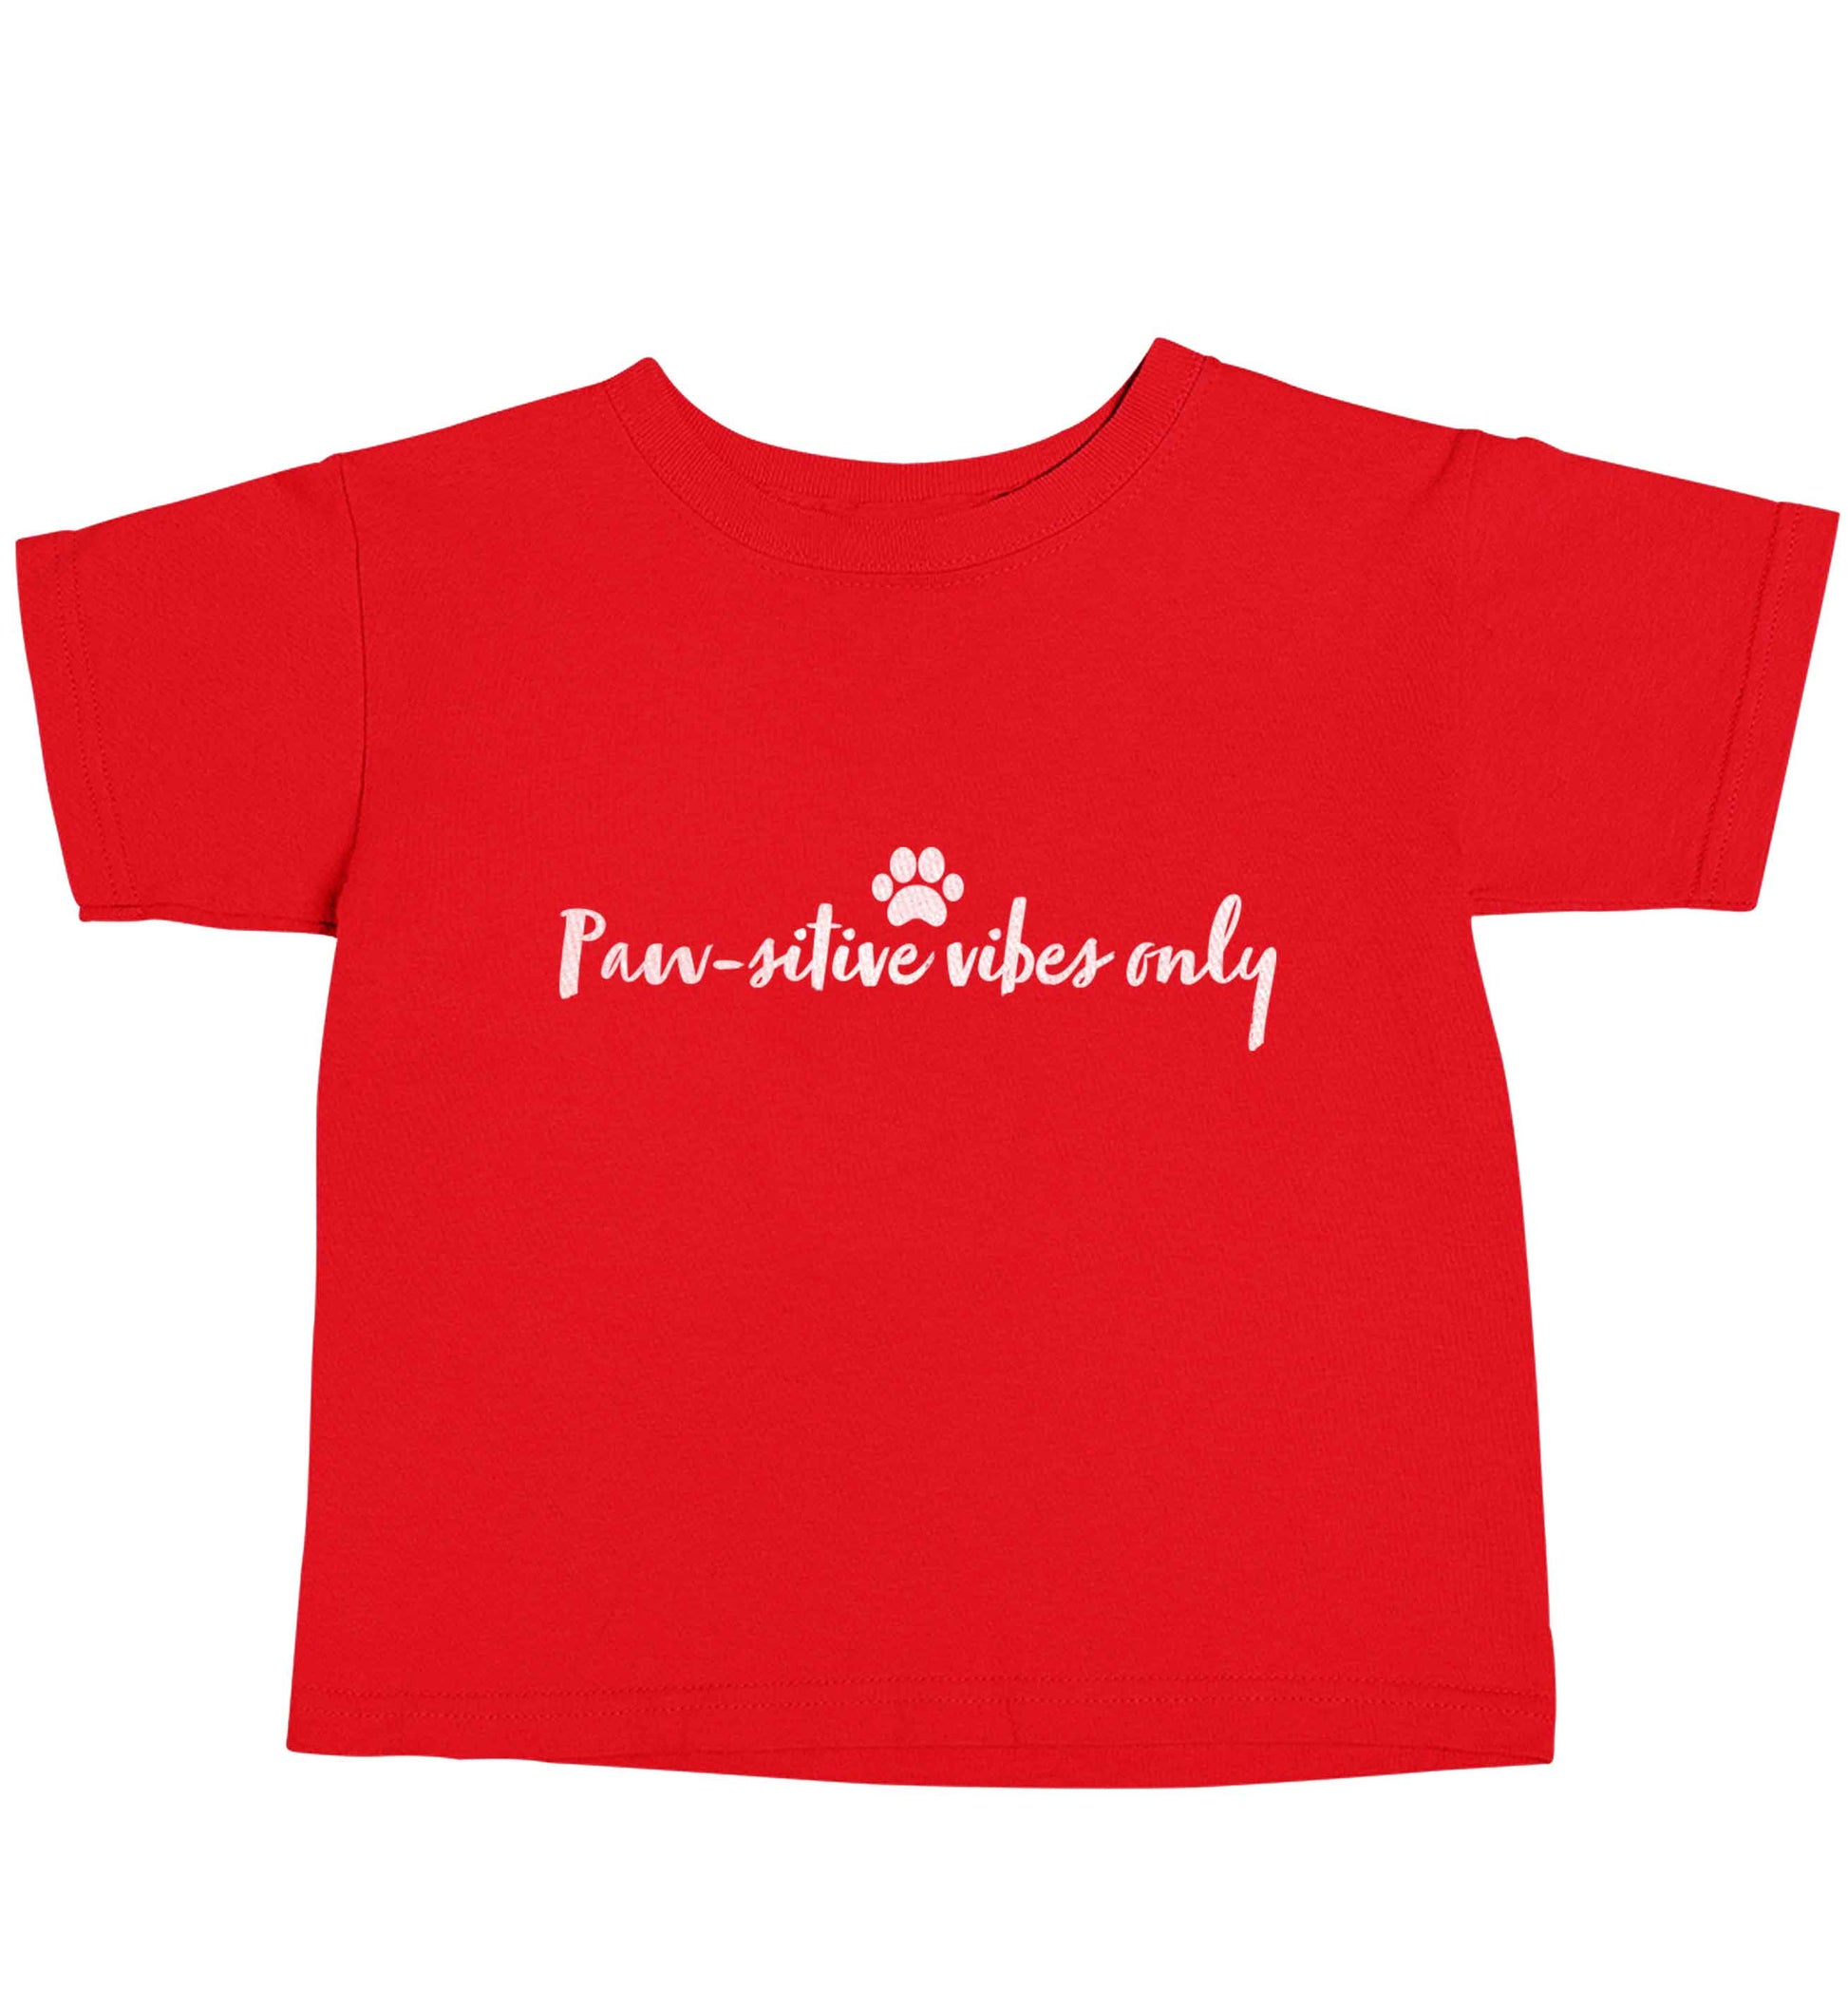 Pawsitive vibes only Kit red baby toddler Tshirt 2 Years